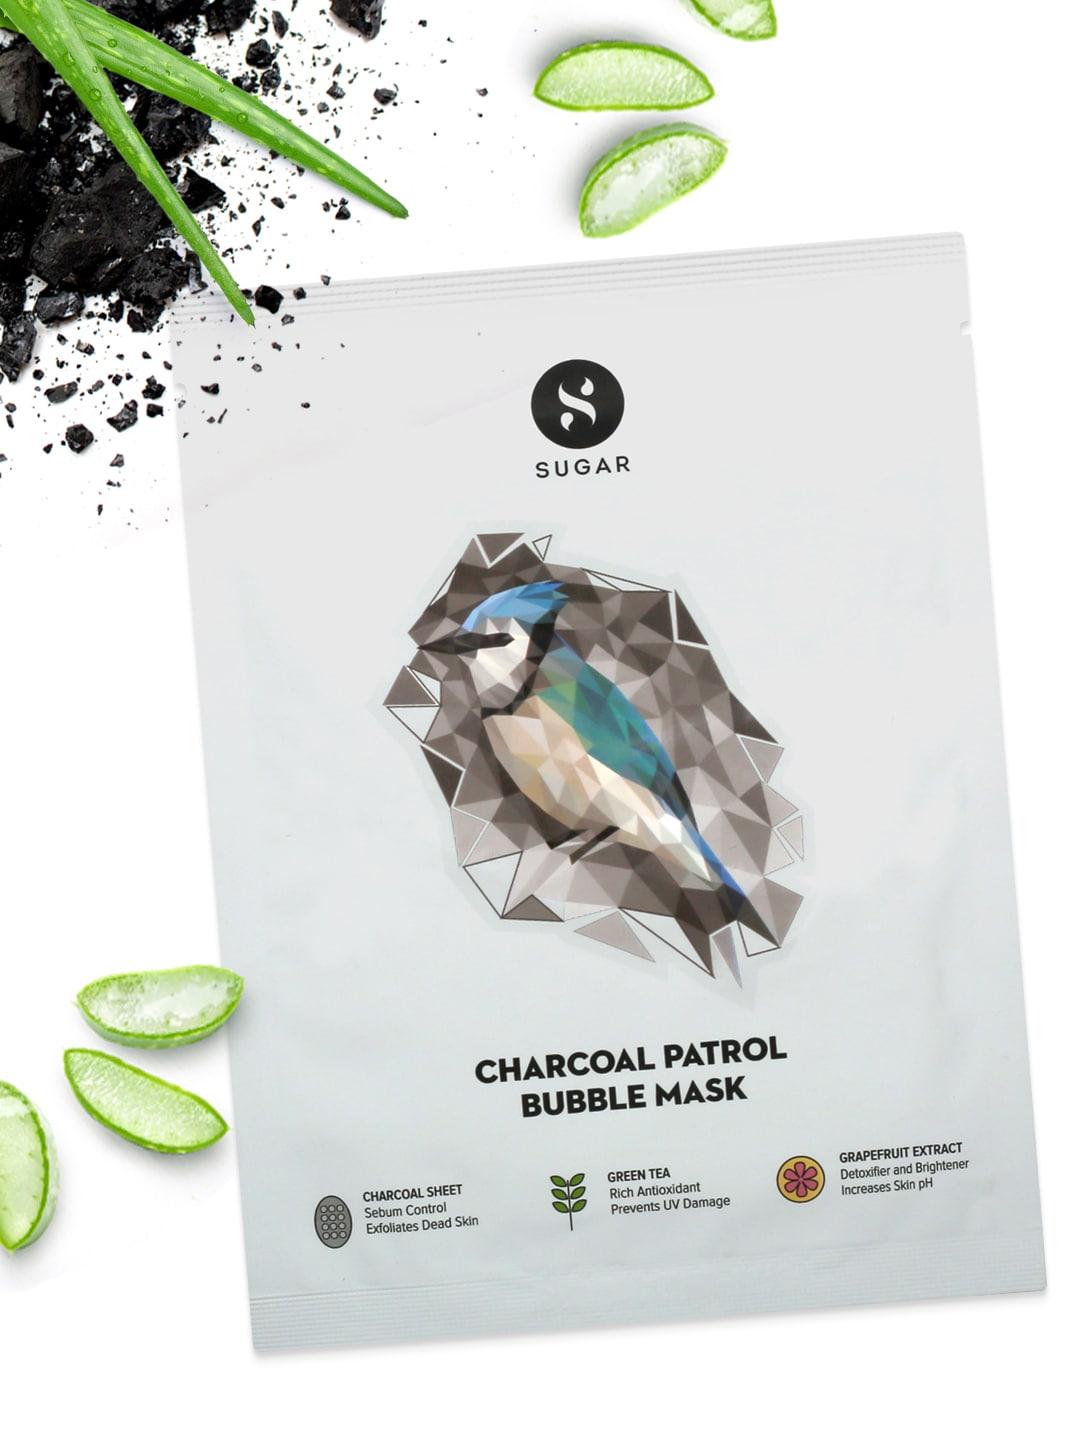 SUGAR Cosmetics Charcoal Patrol Bubble Mask with Green Tea & Grapefruit Extracts - 20 g